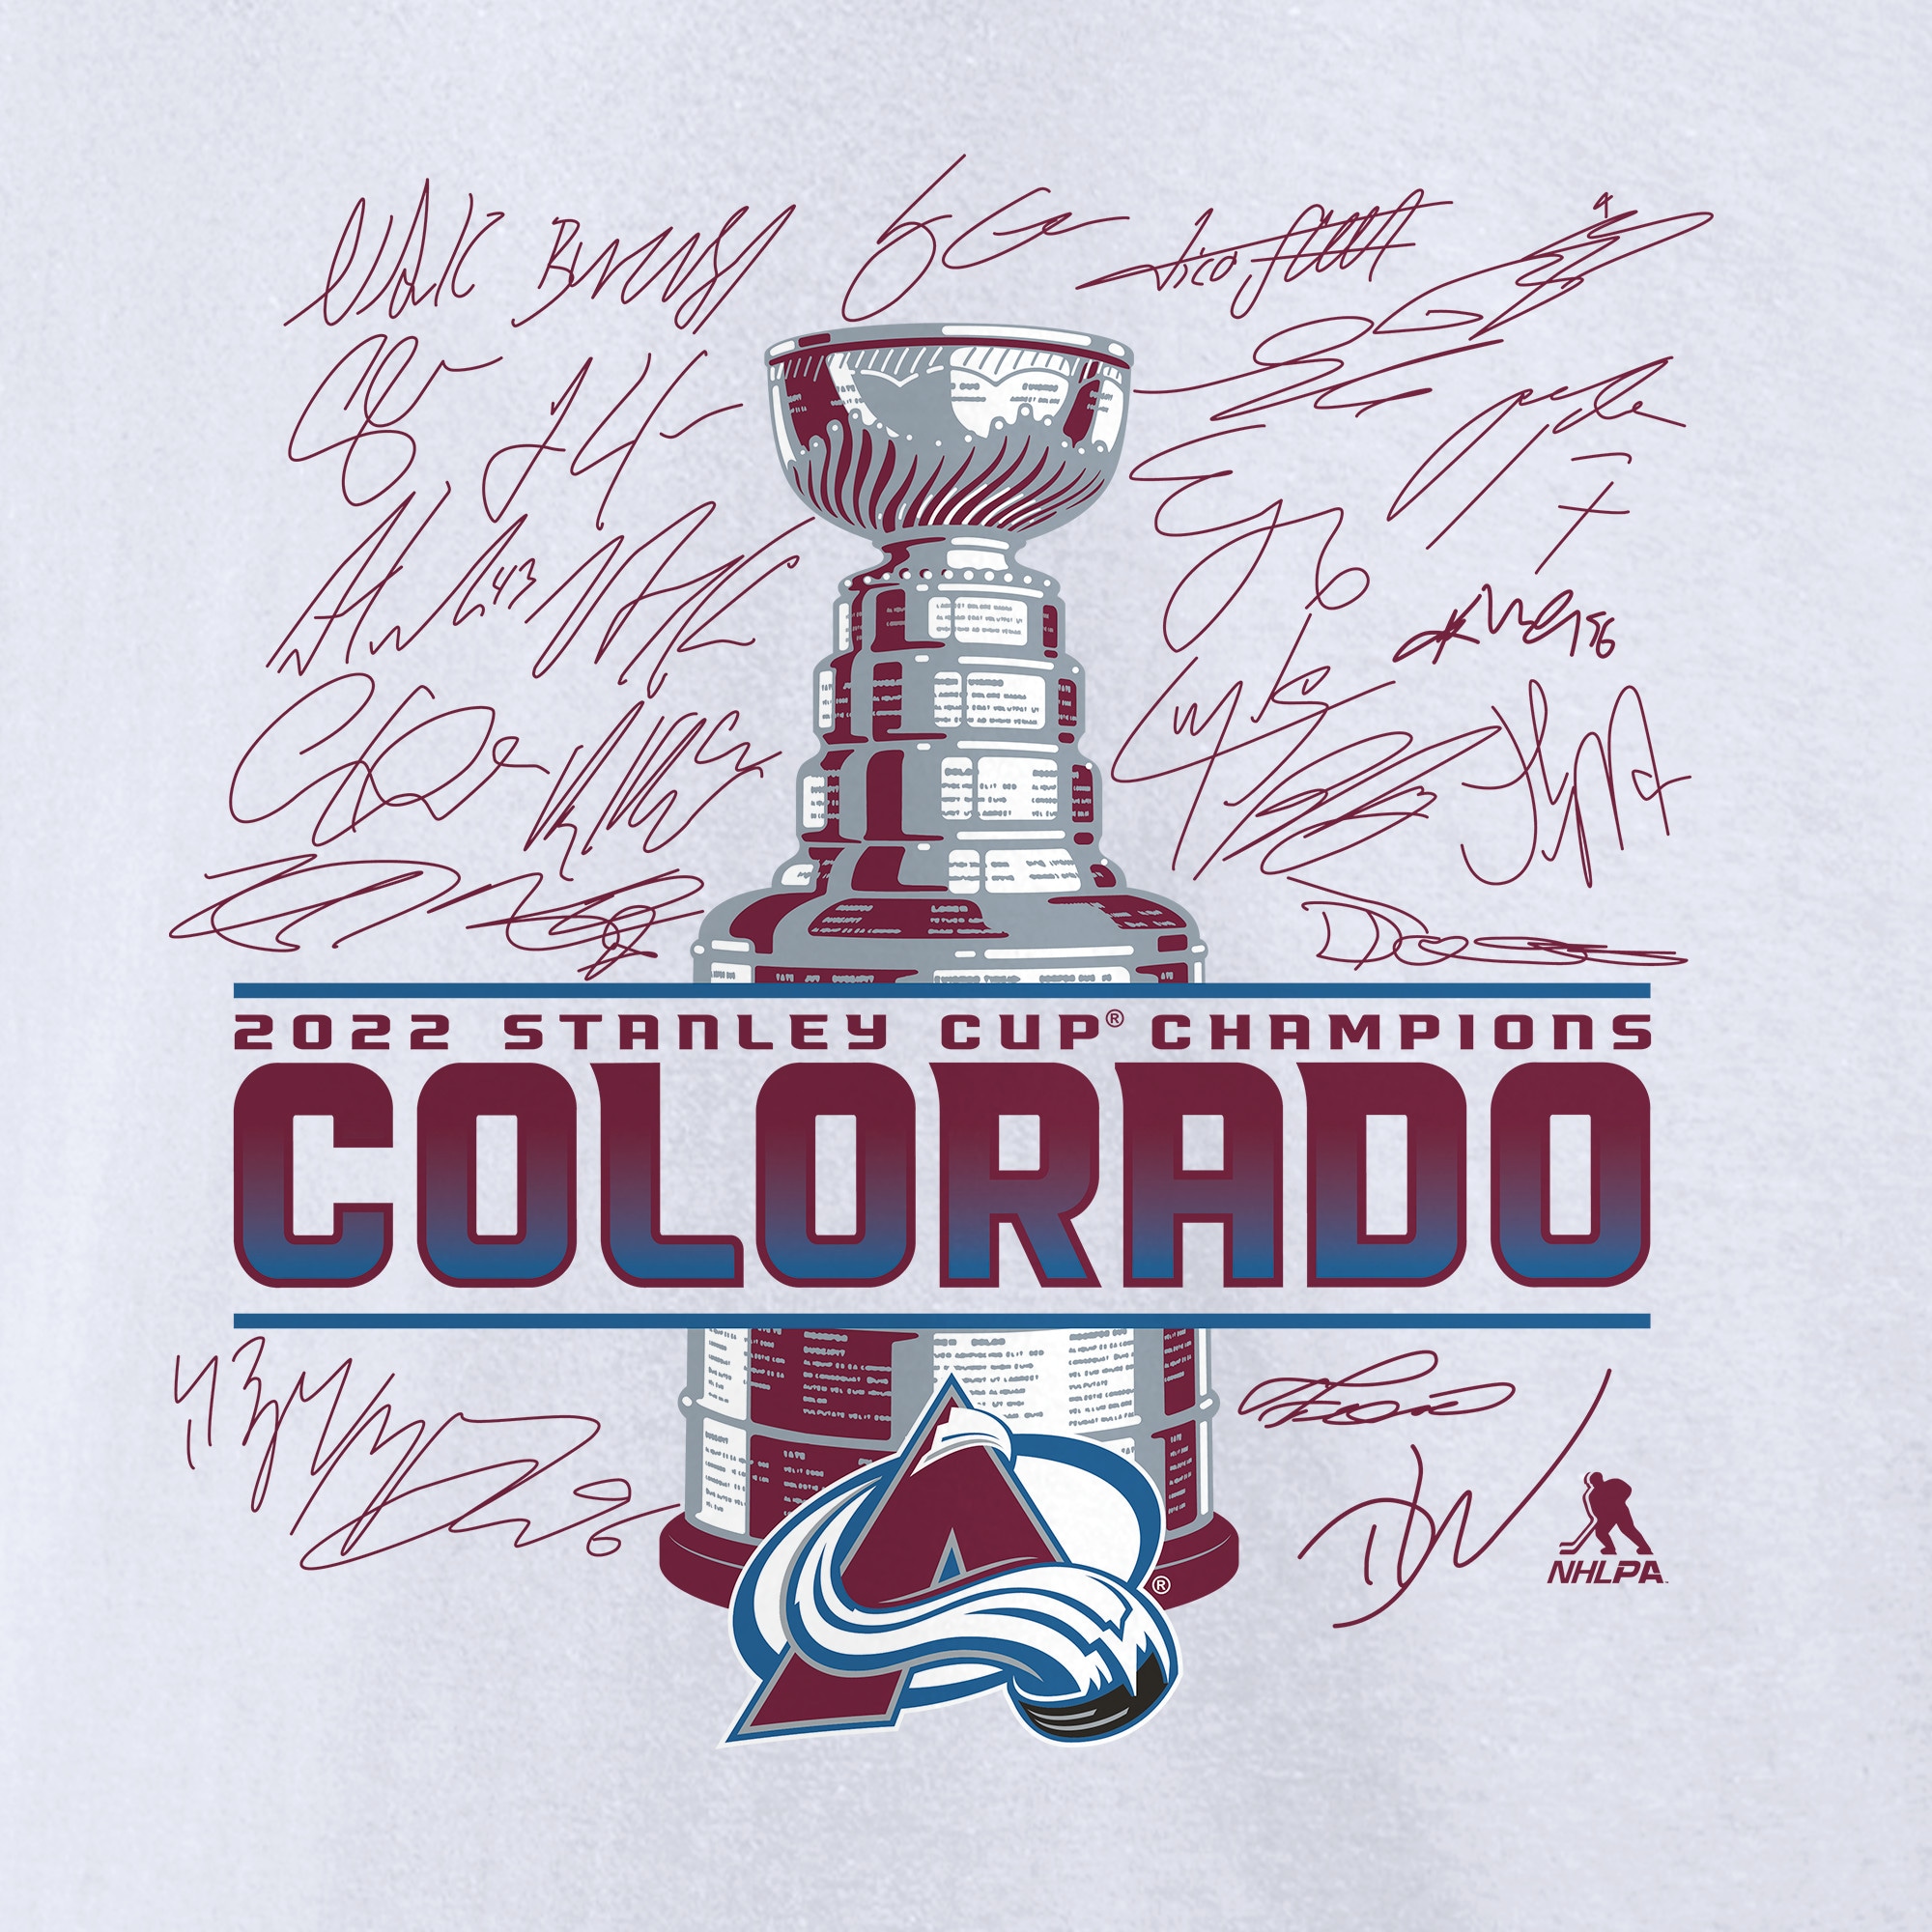 Men's Fanatics Branded White Colorado Avalanche 2022 Stanley Cup Champions Signature Roster T-Shirt - image 5 of 5